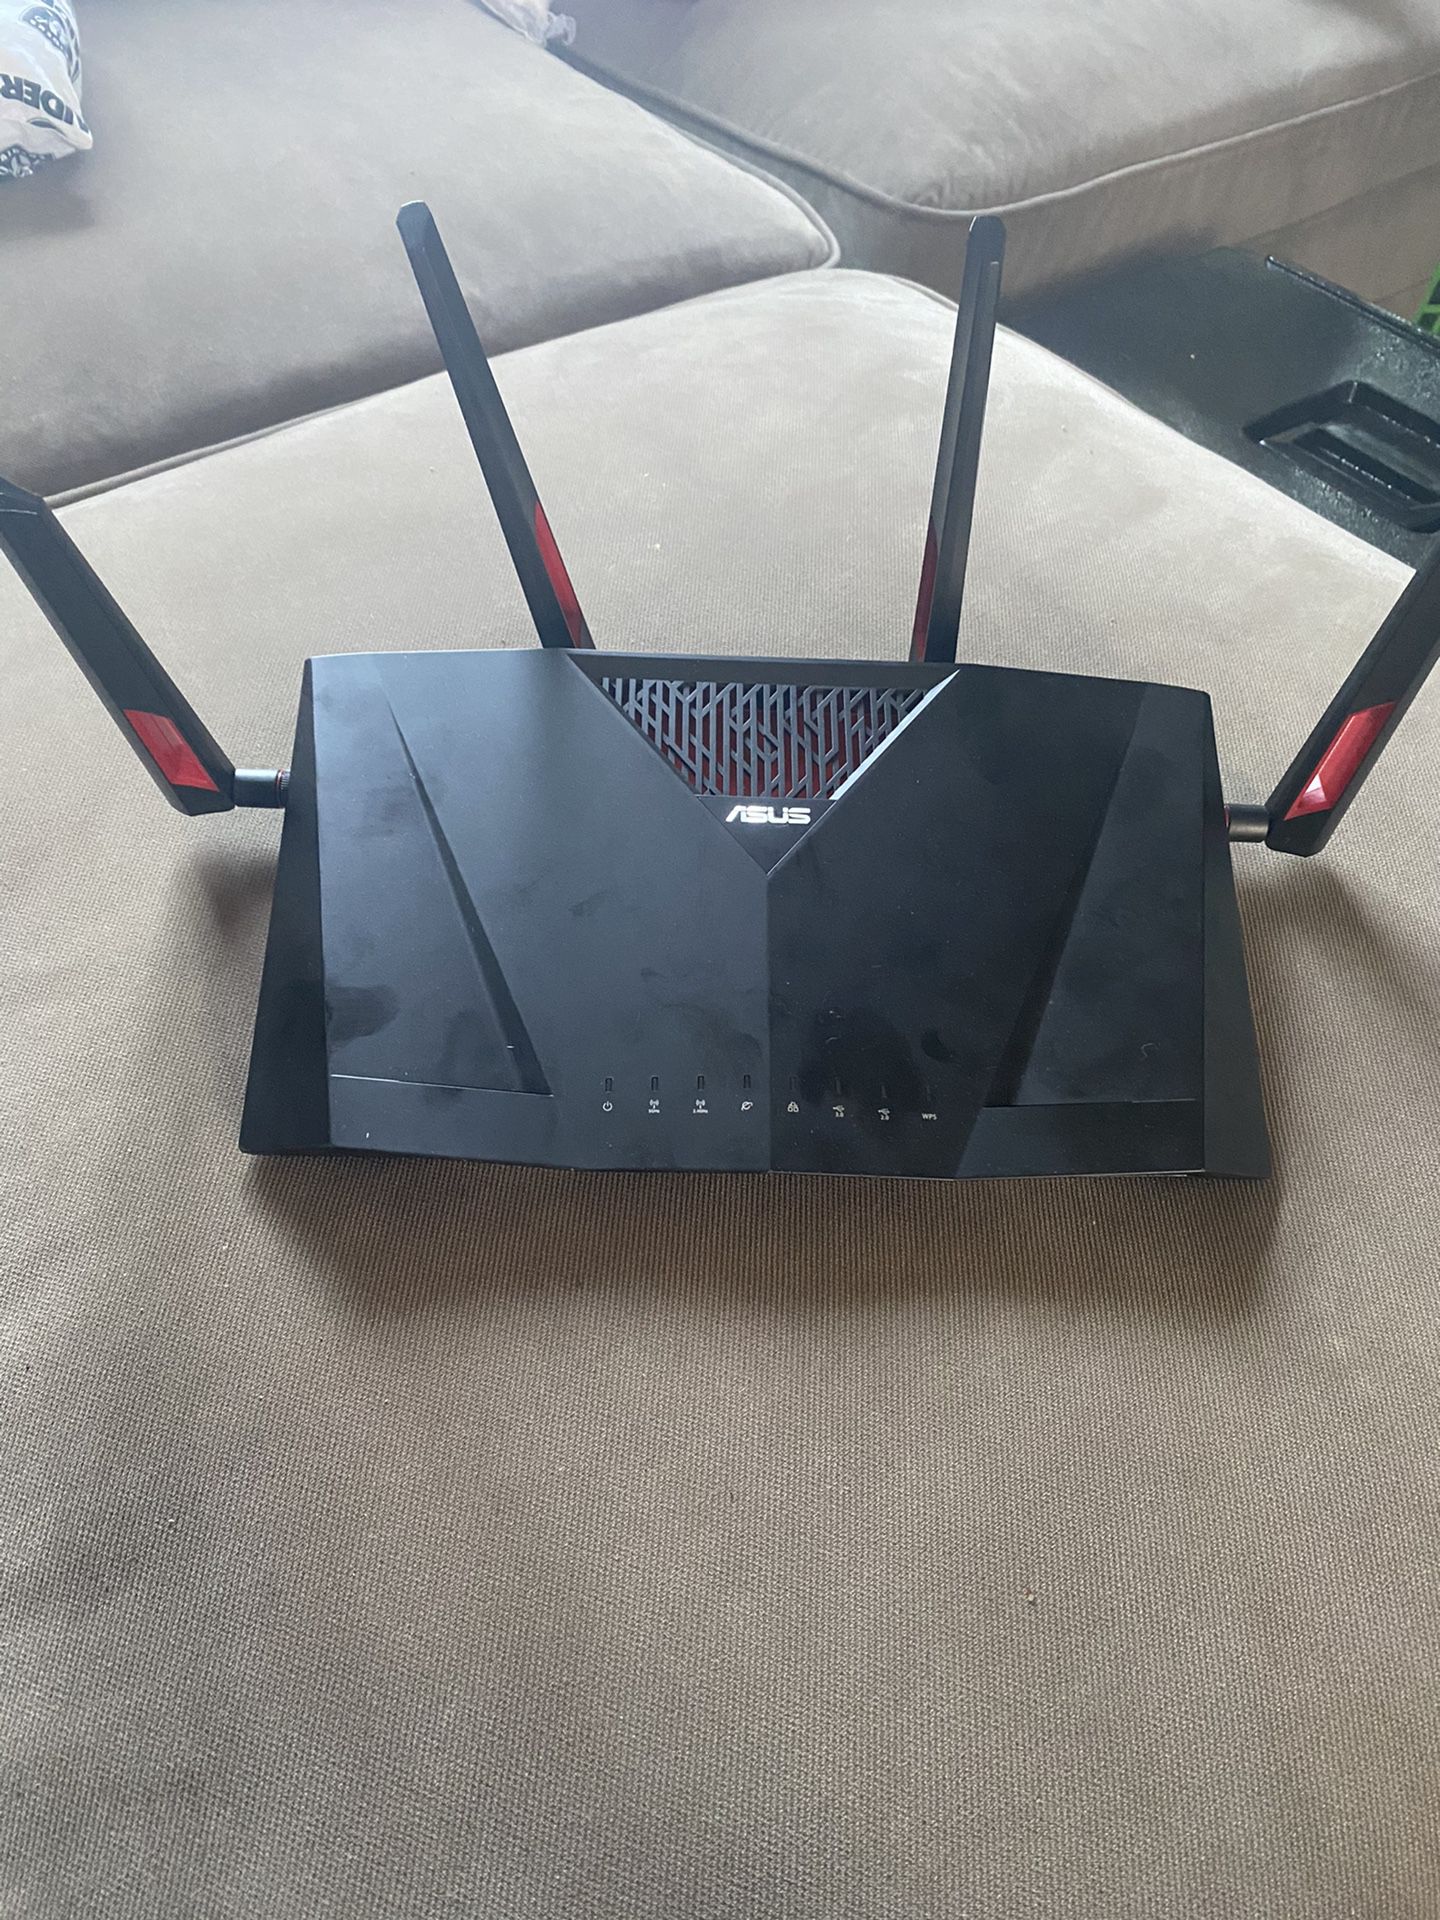 Asus wireless router like new